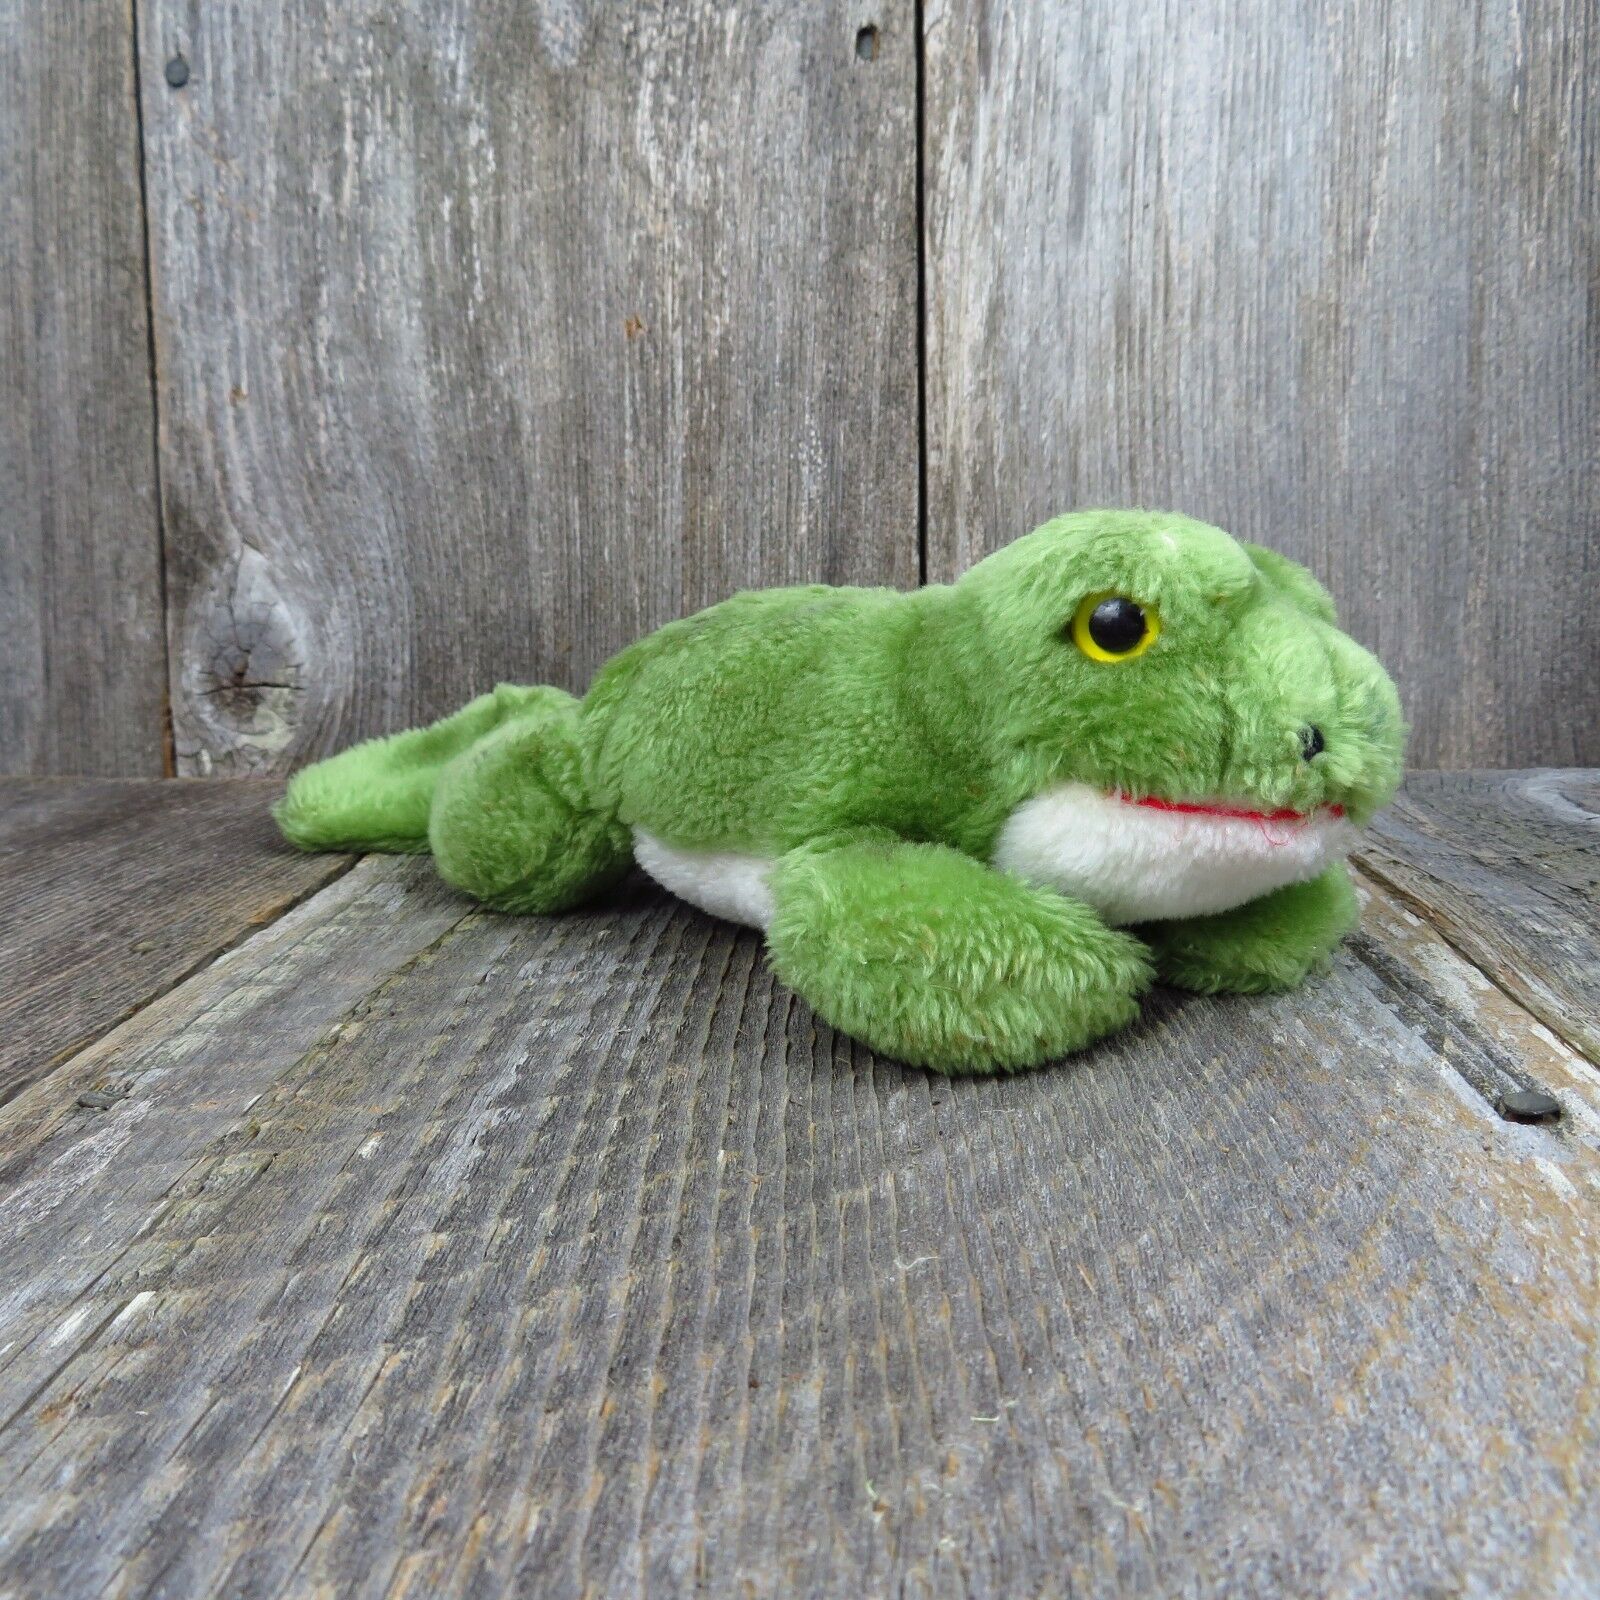 Frog Toad Plush Vintage Dakin Stuffed Animal Toy Doll Nut Filled Green – At  Grandma's Table